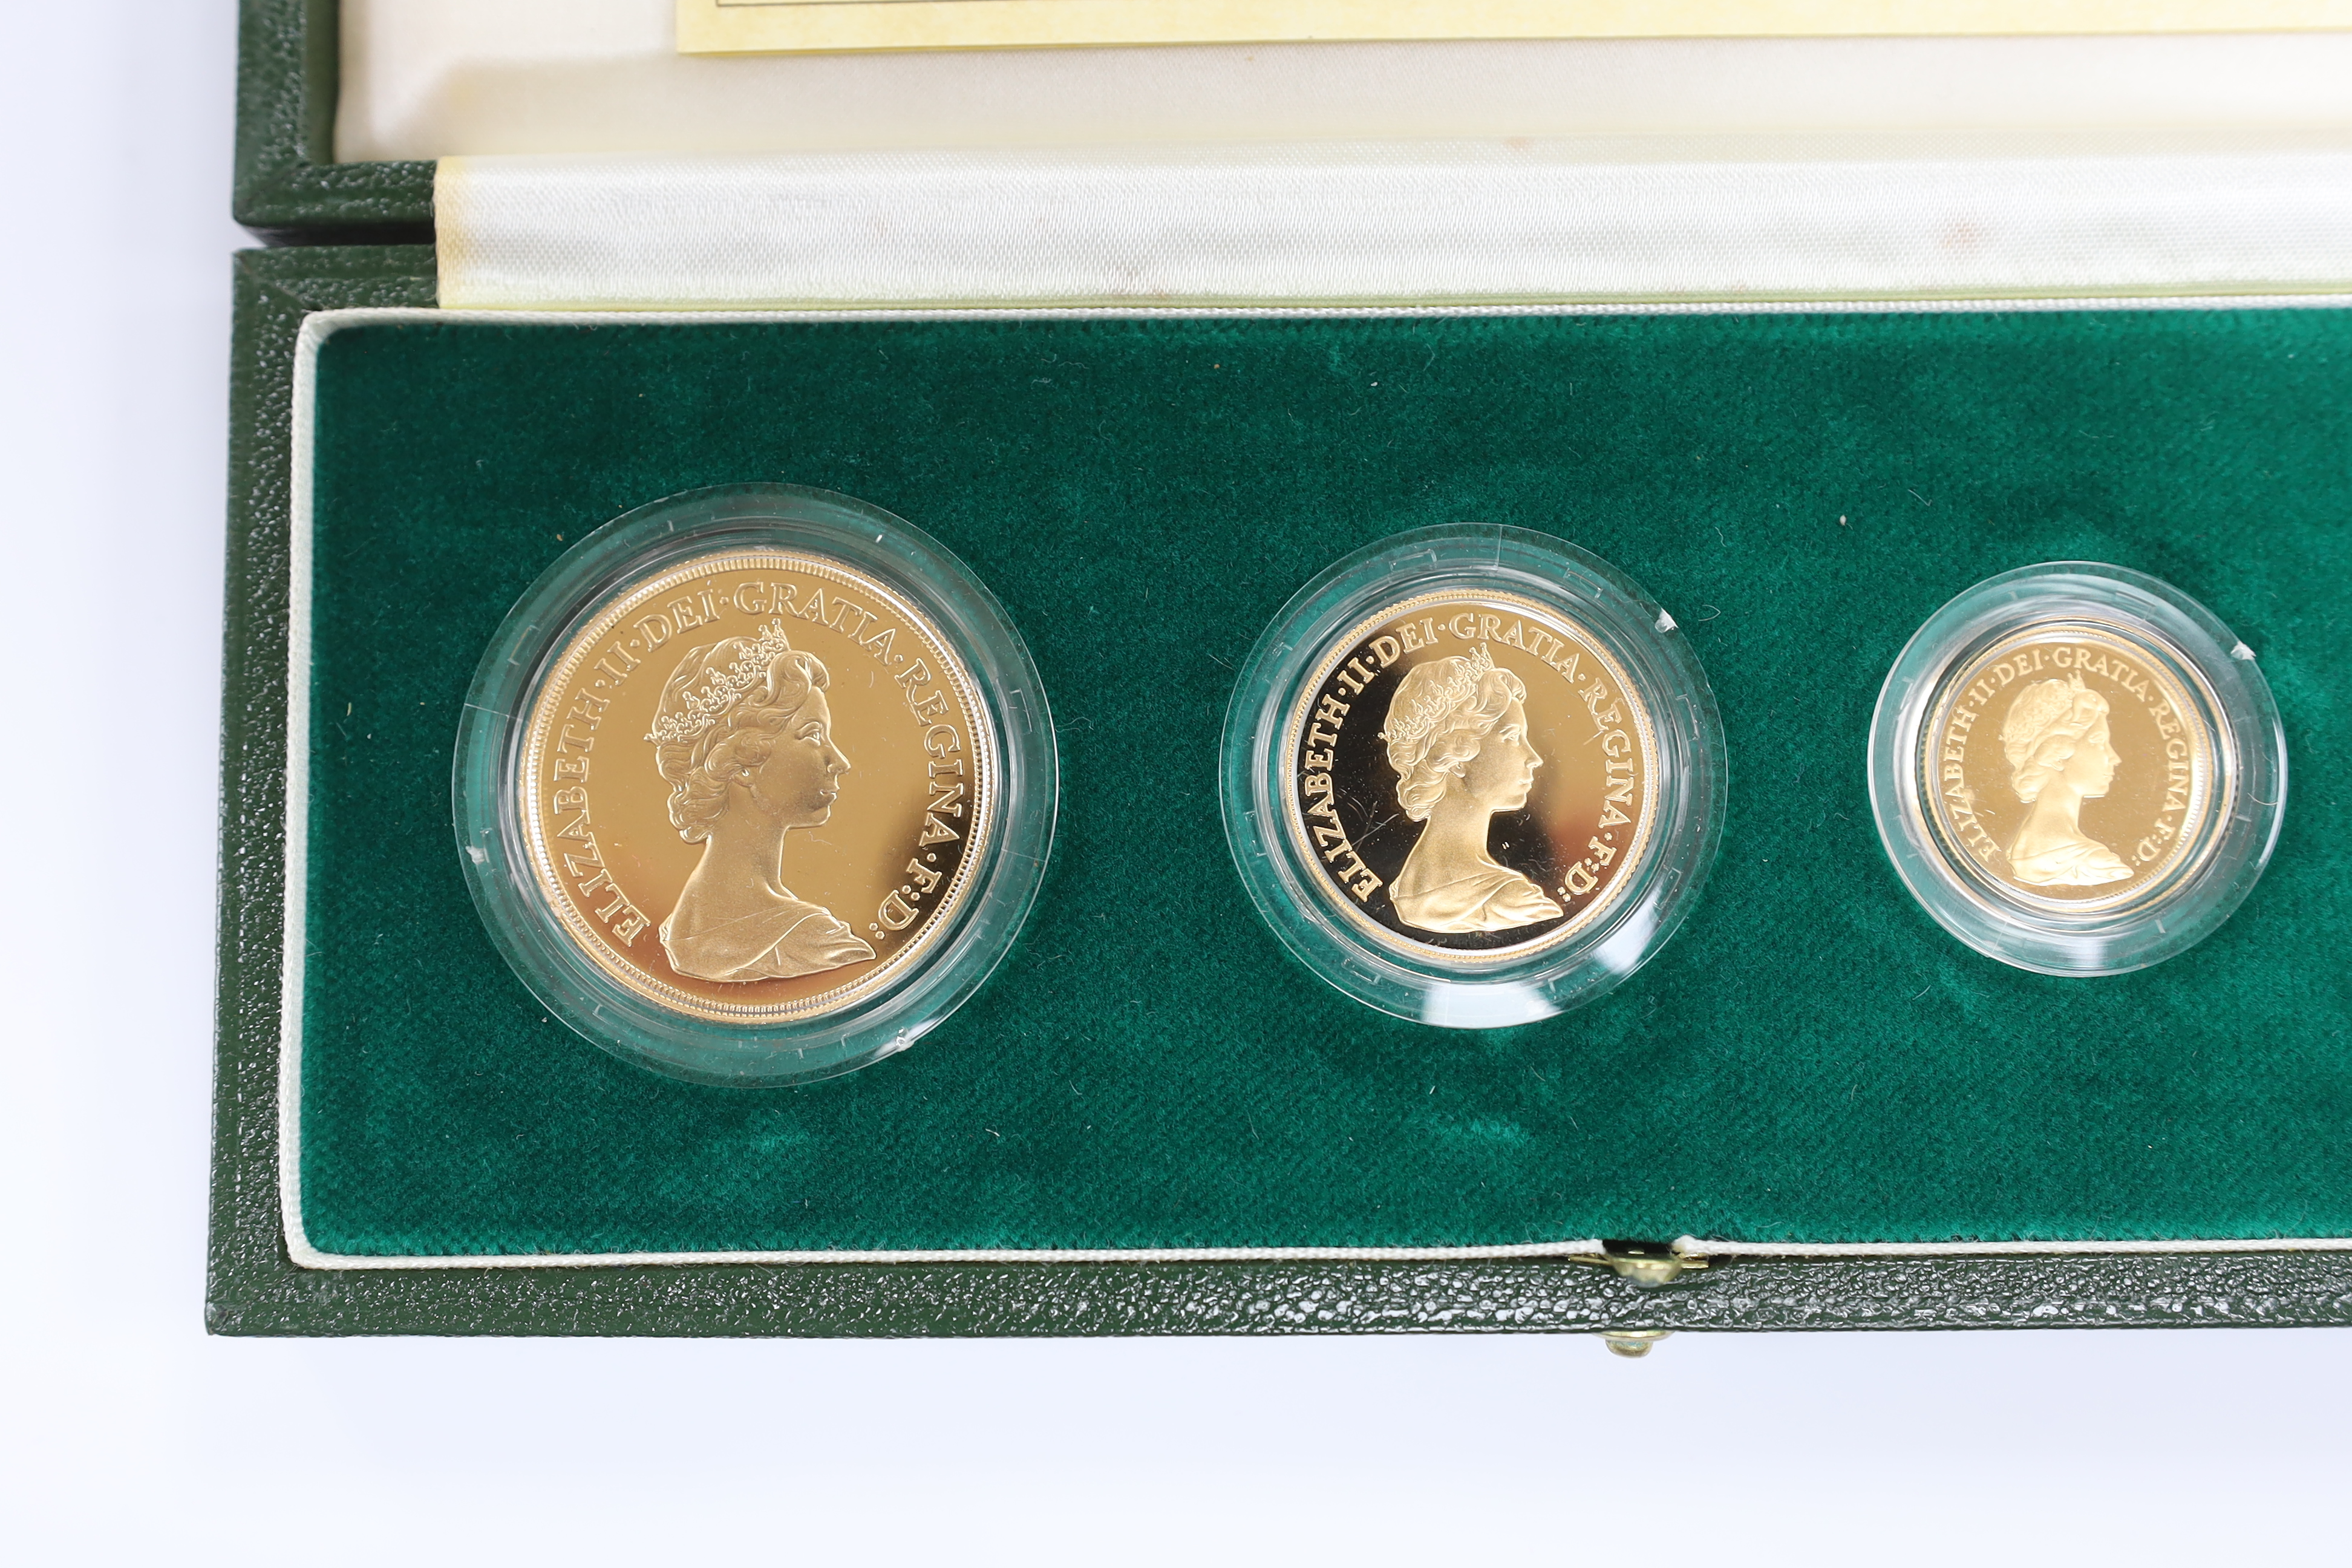 British gold coins - A Royal Mint UK QEII Gold Proof Set, 1980, comprising £5, £2, sovereign and - Image 2 of 3